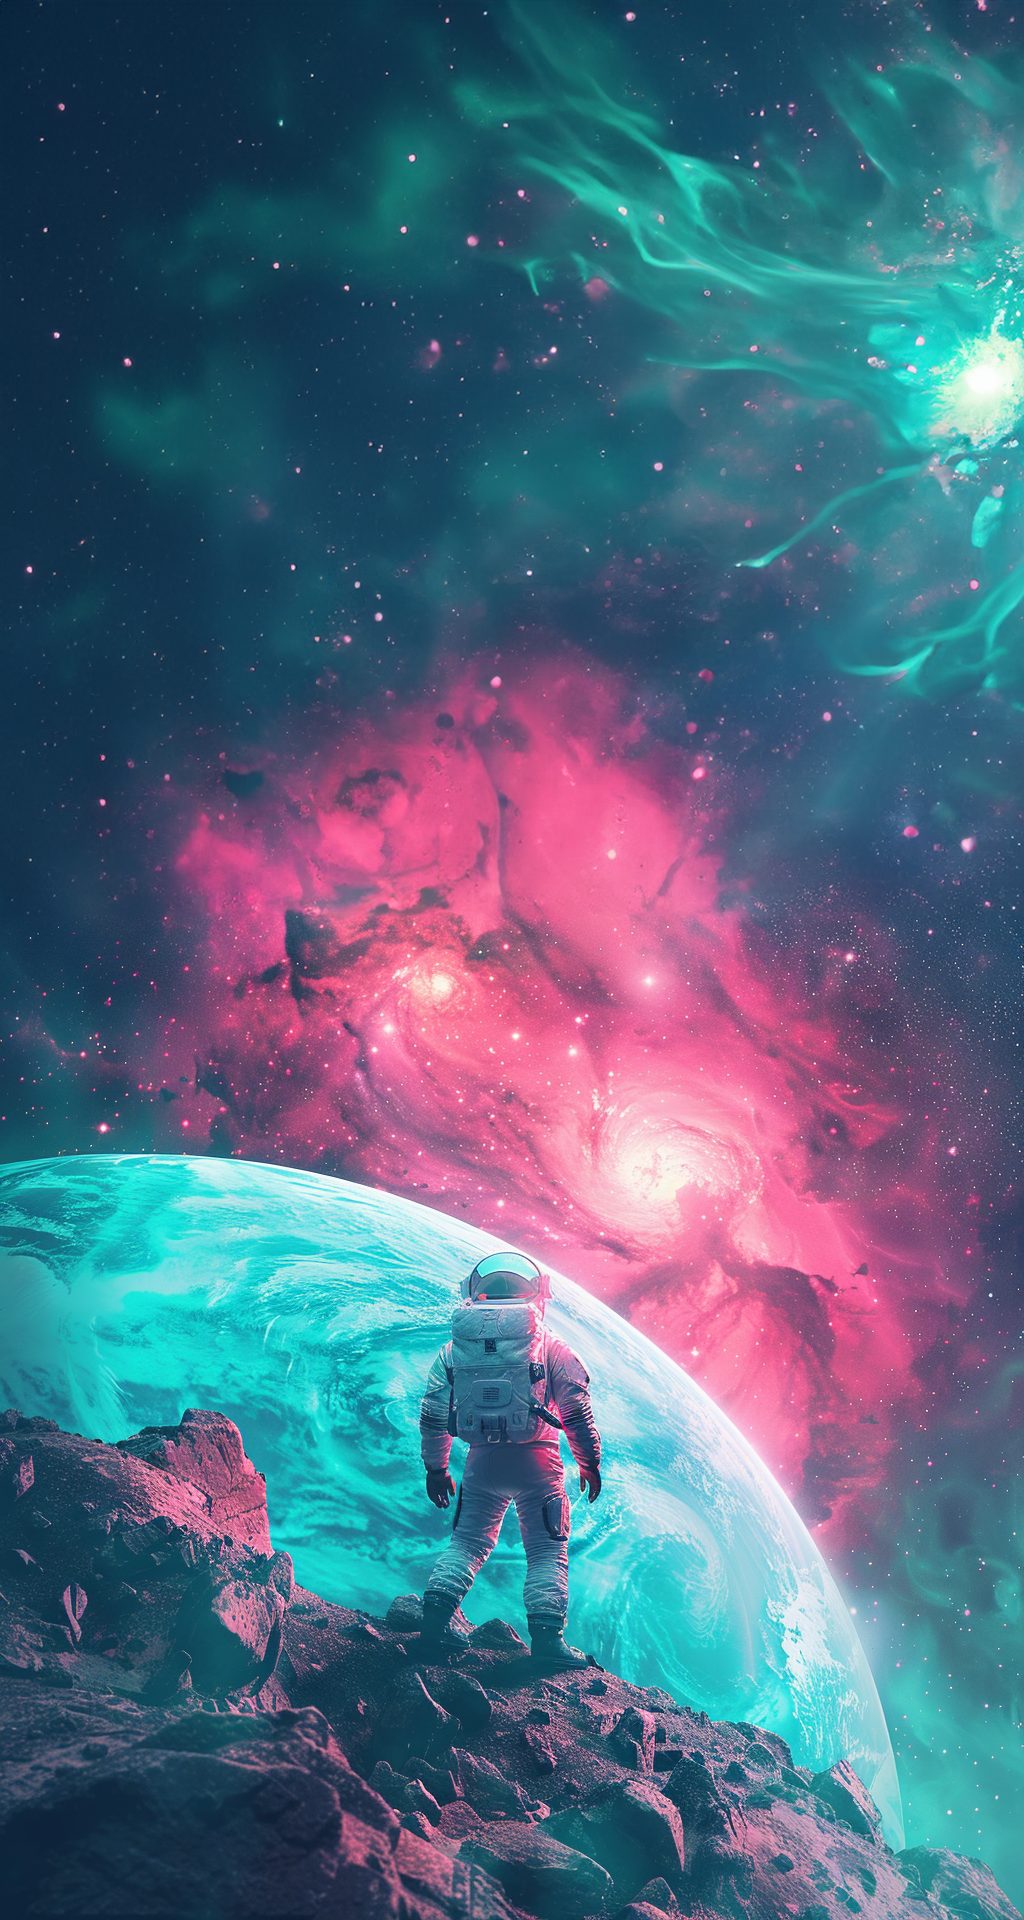 astronaut looking out at the galaxy with teal and pink colors in the sky